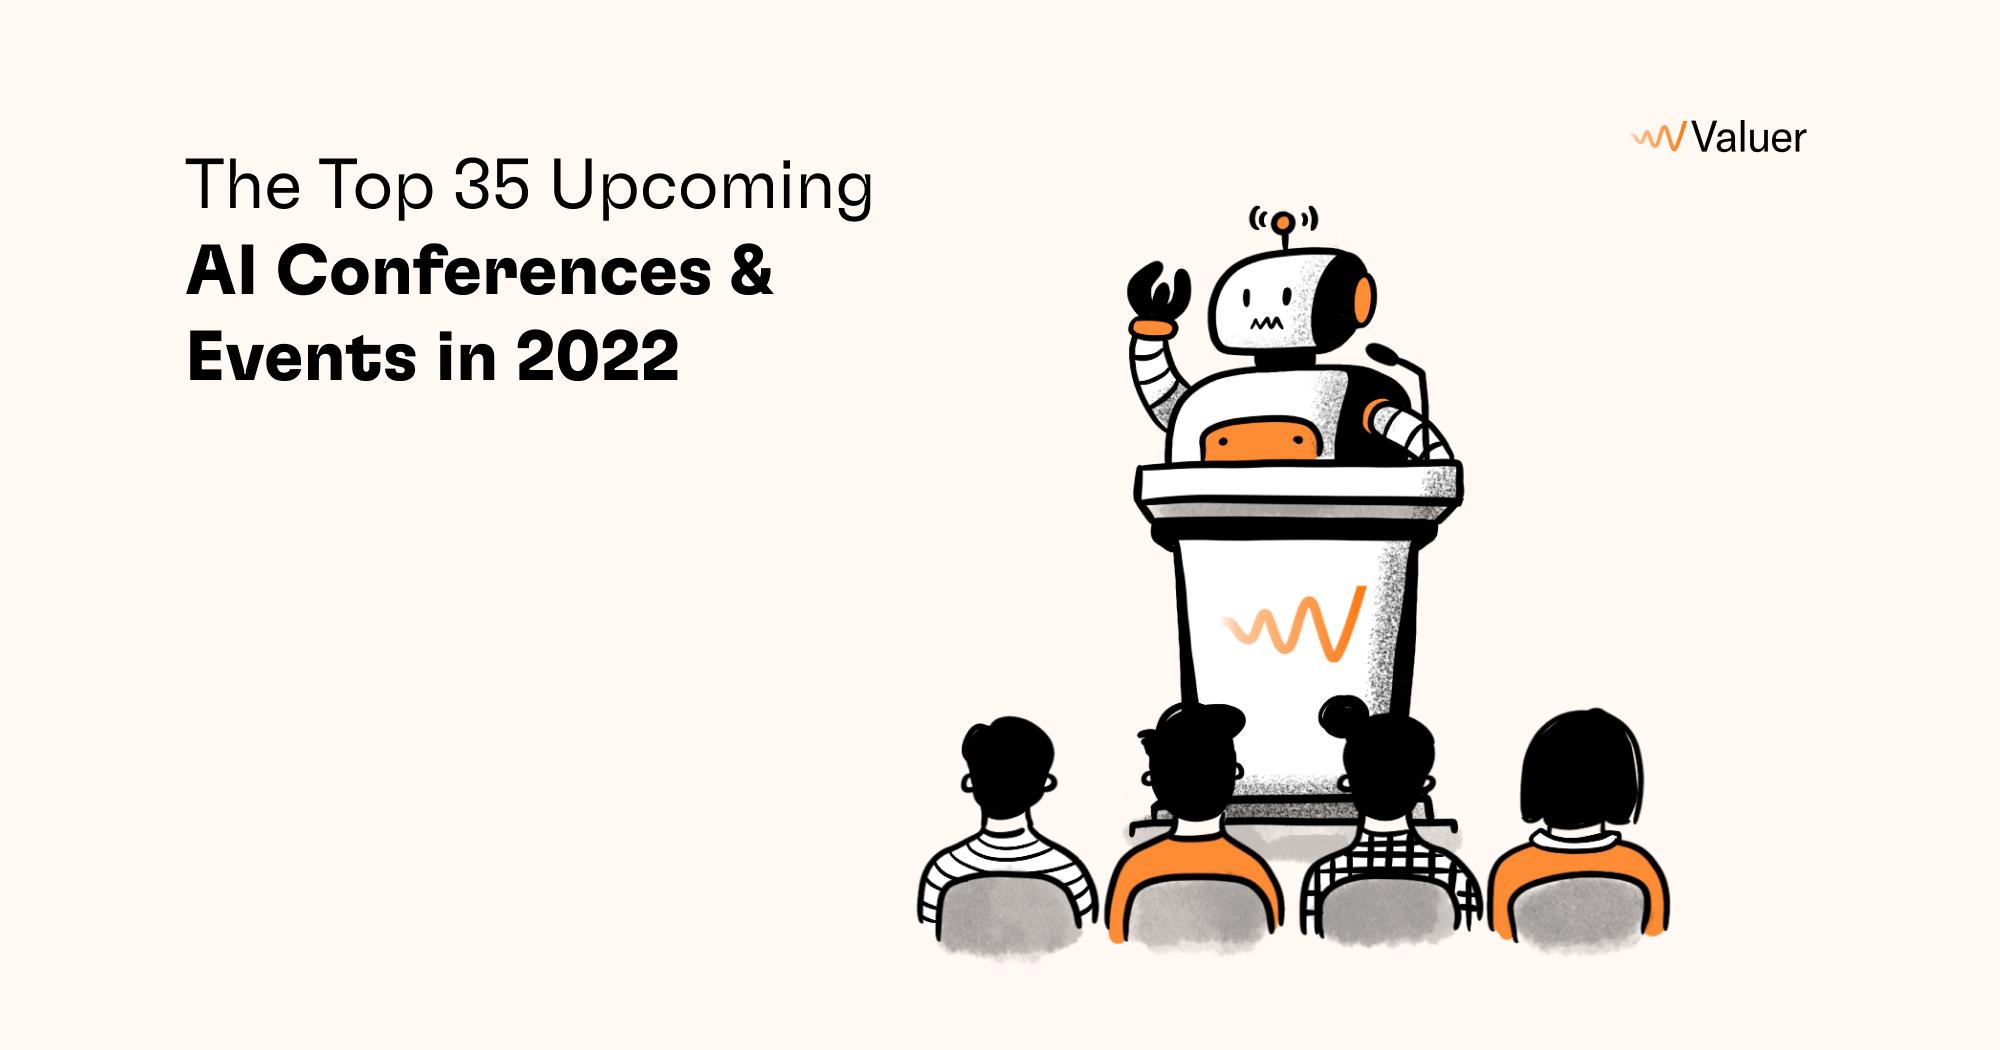 The Top 35 AI Conferences & Events in 2022